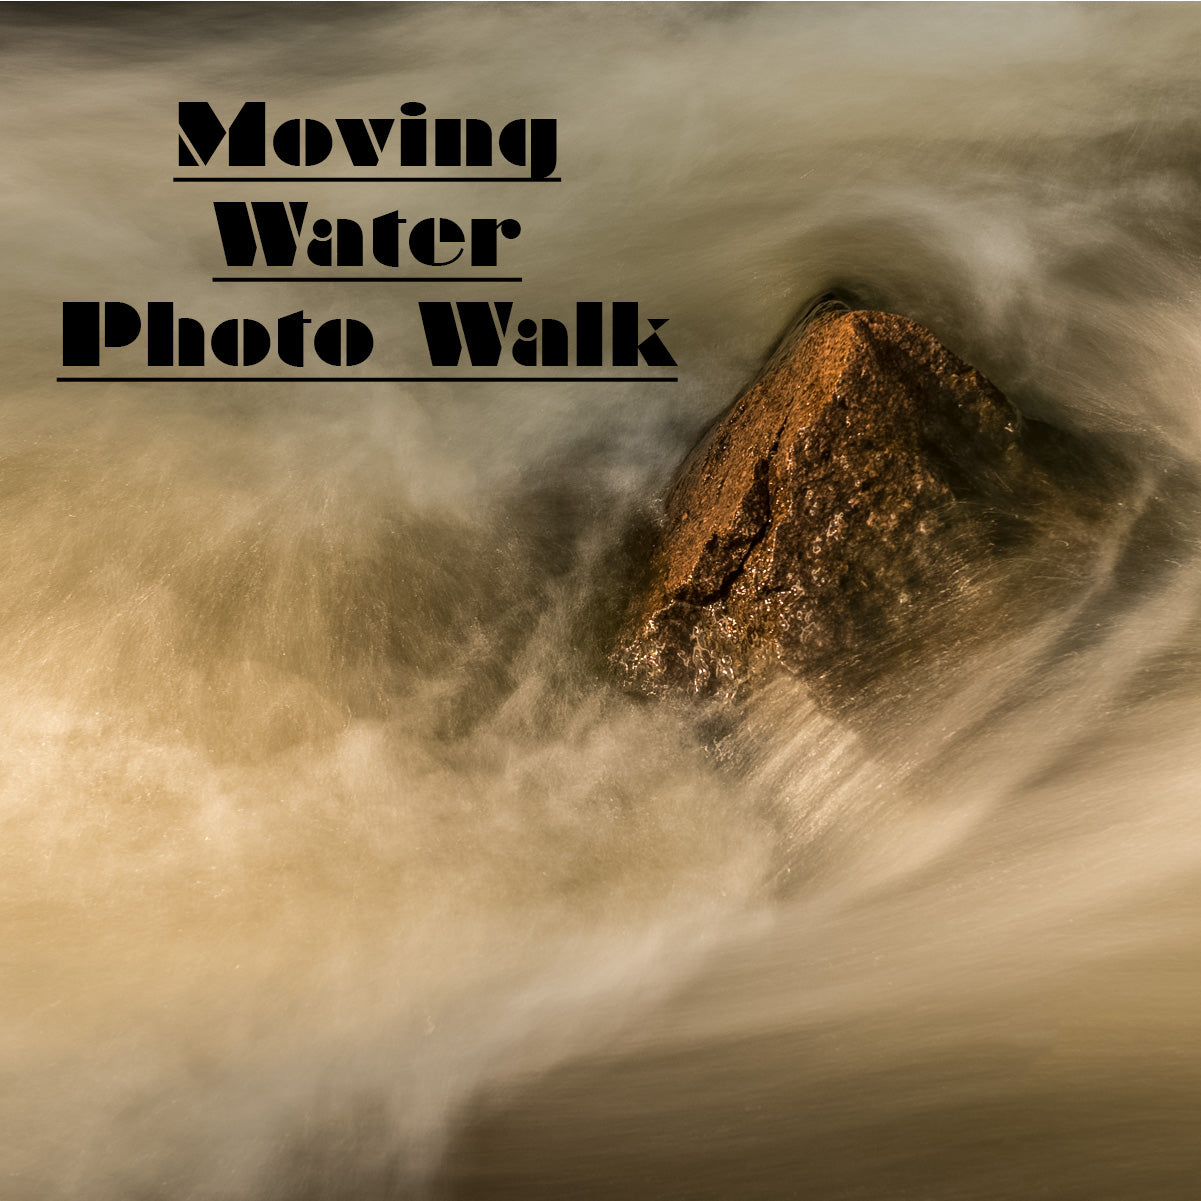 Photo Walk: Moving Water Sat 5.18.24 @4P Photography Class